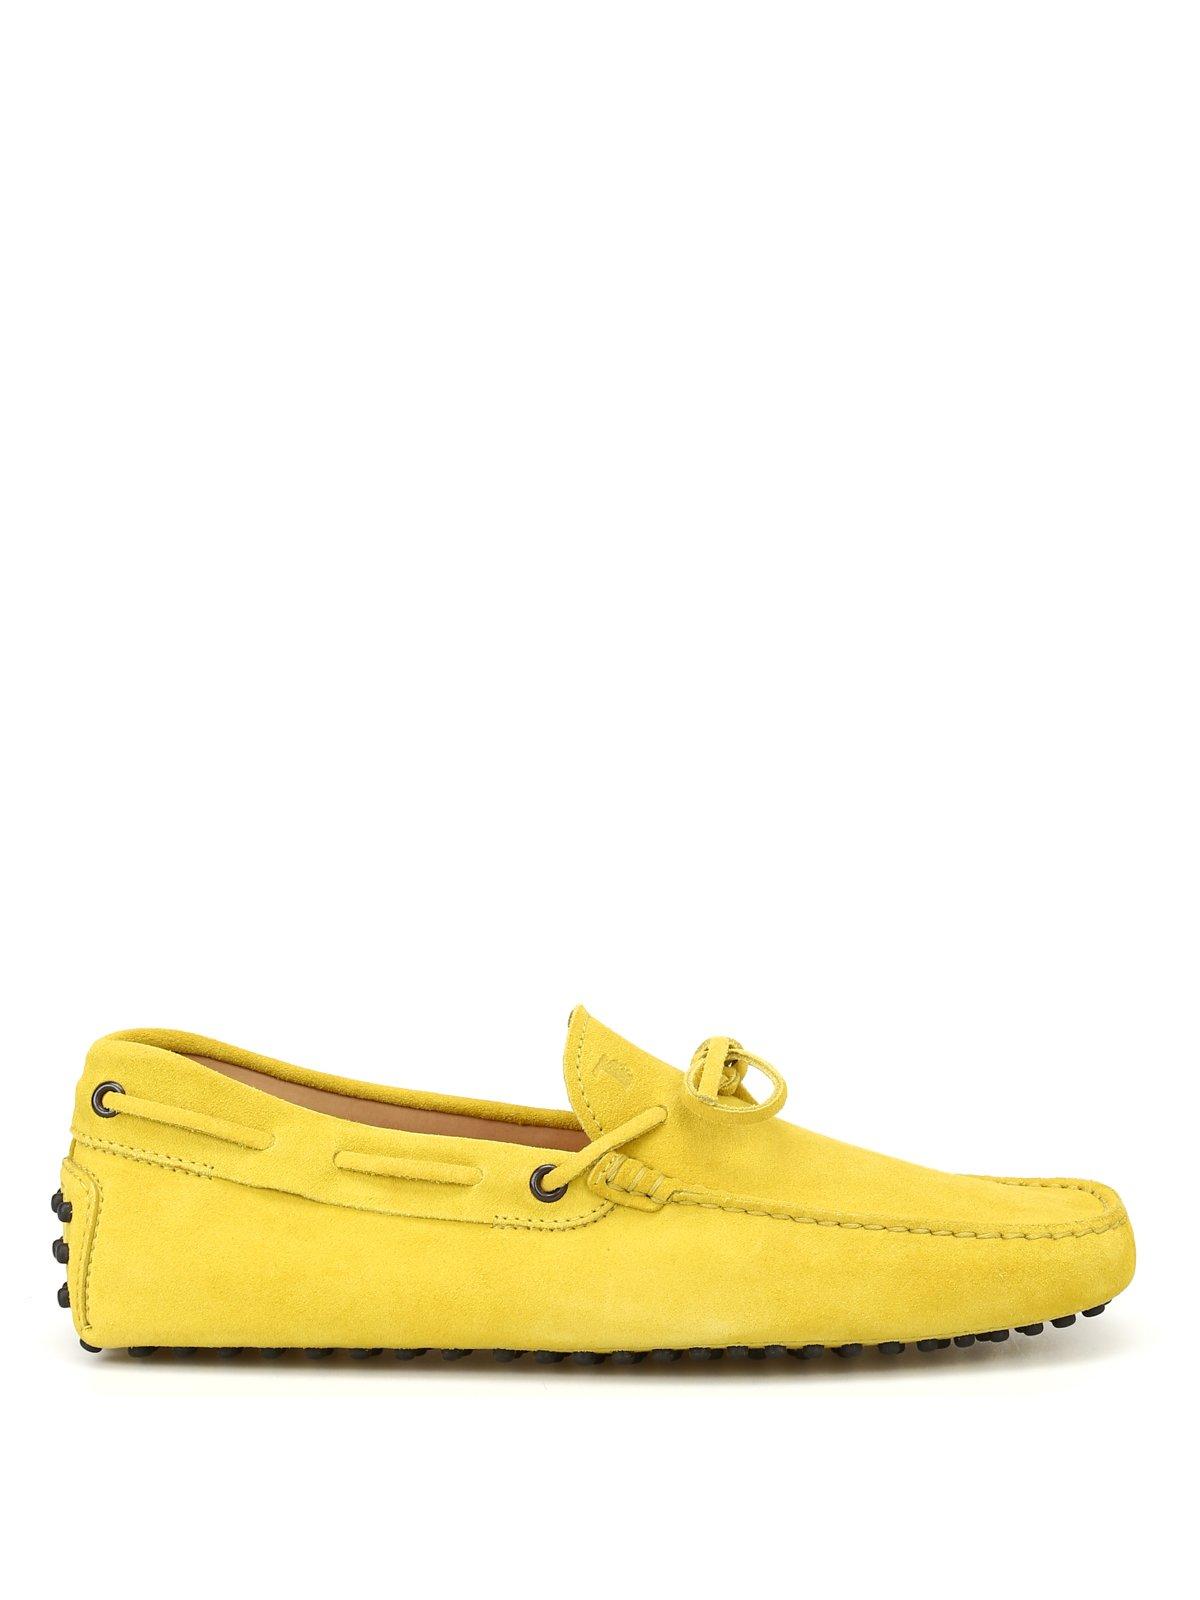 Tod's Suede Loafers in Yellow for Men - Save 2% - Lyst